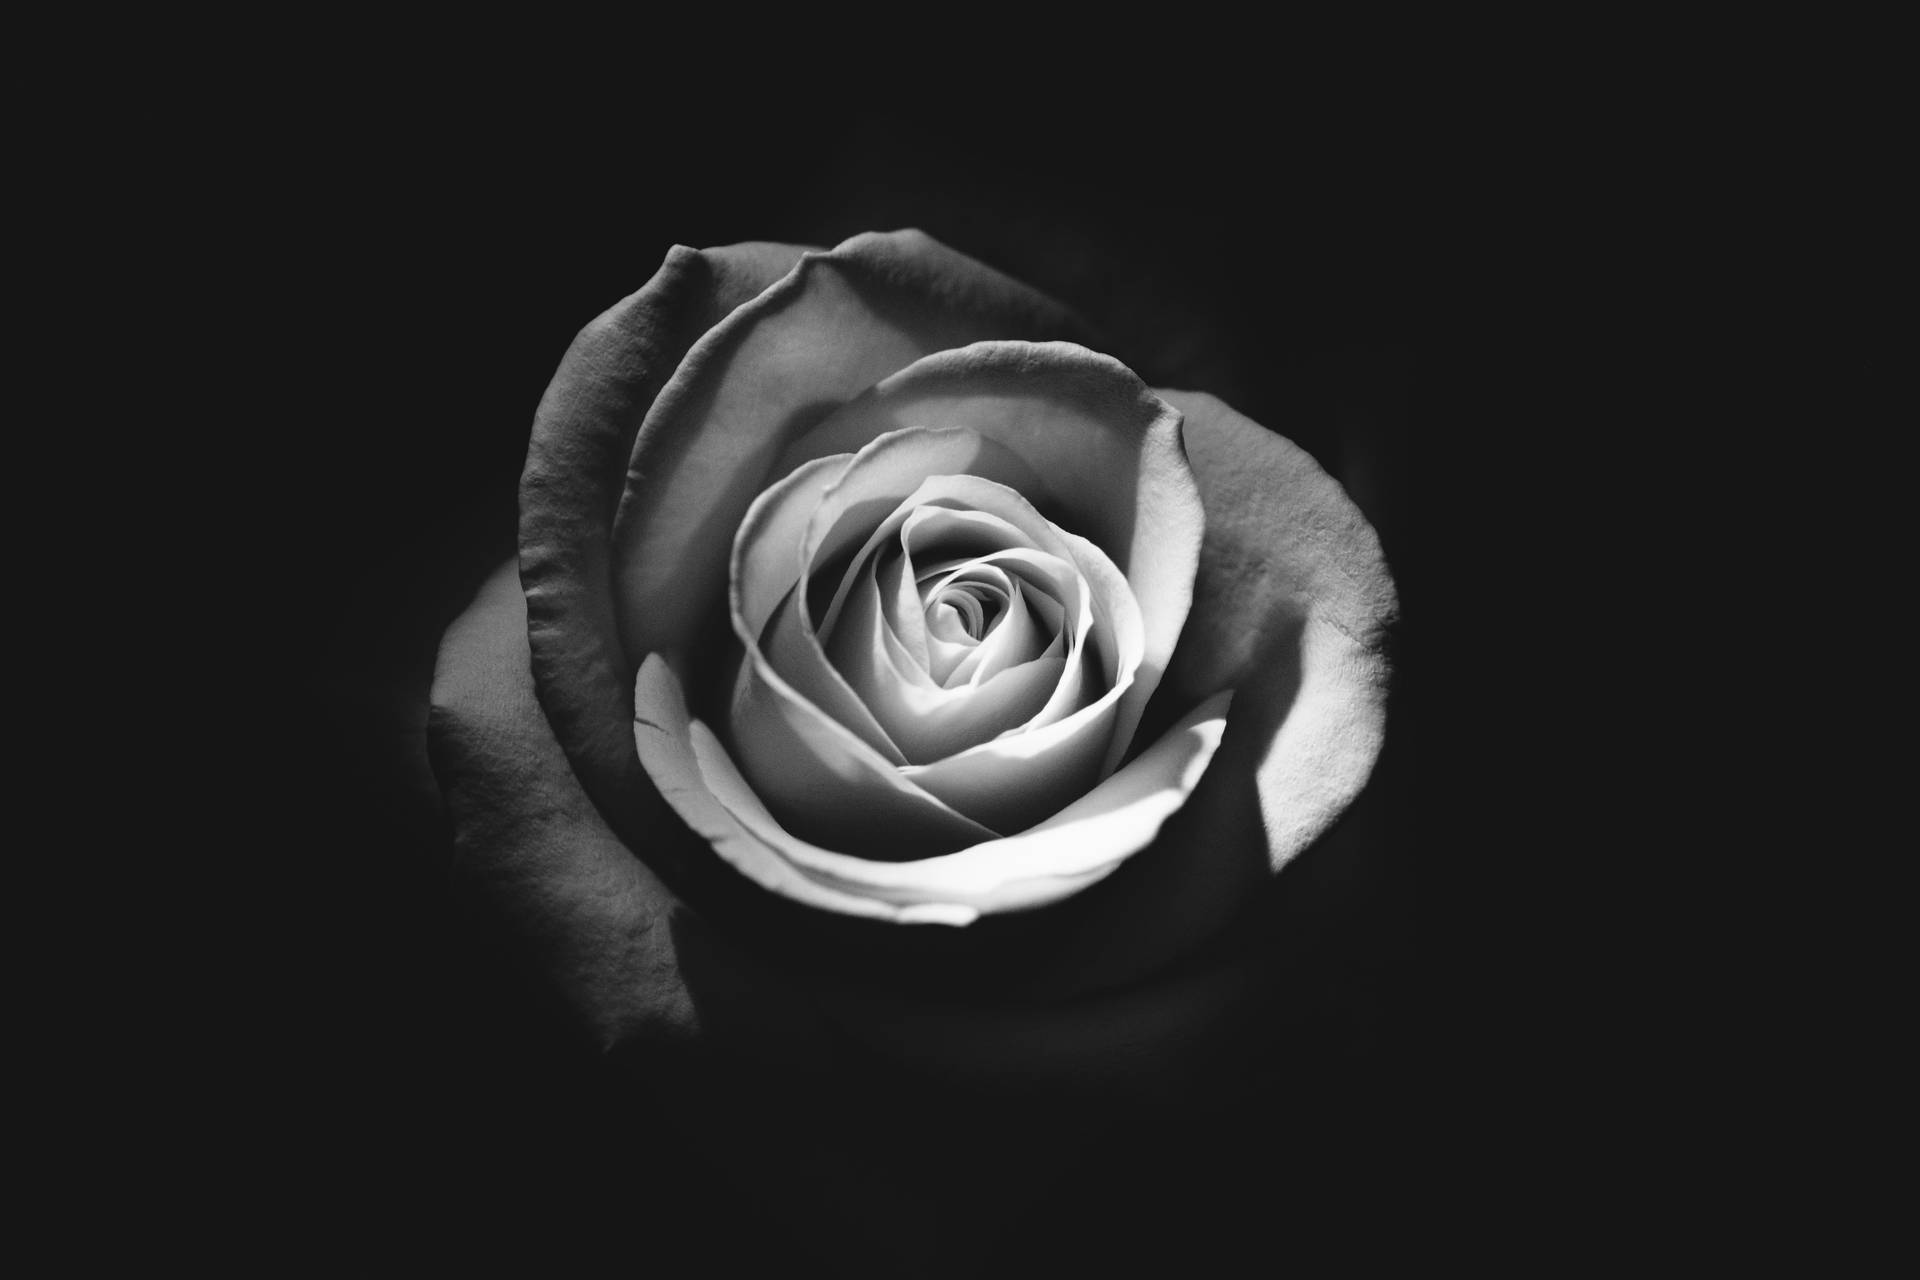 A Solitary Rose In Grayscale